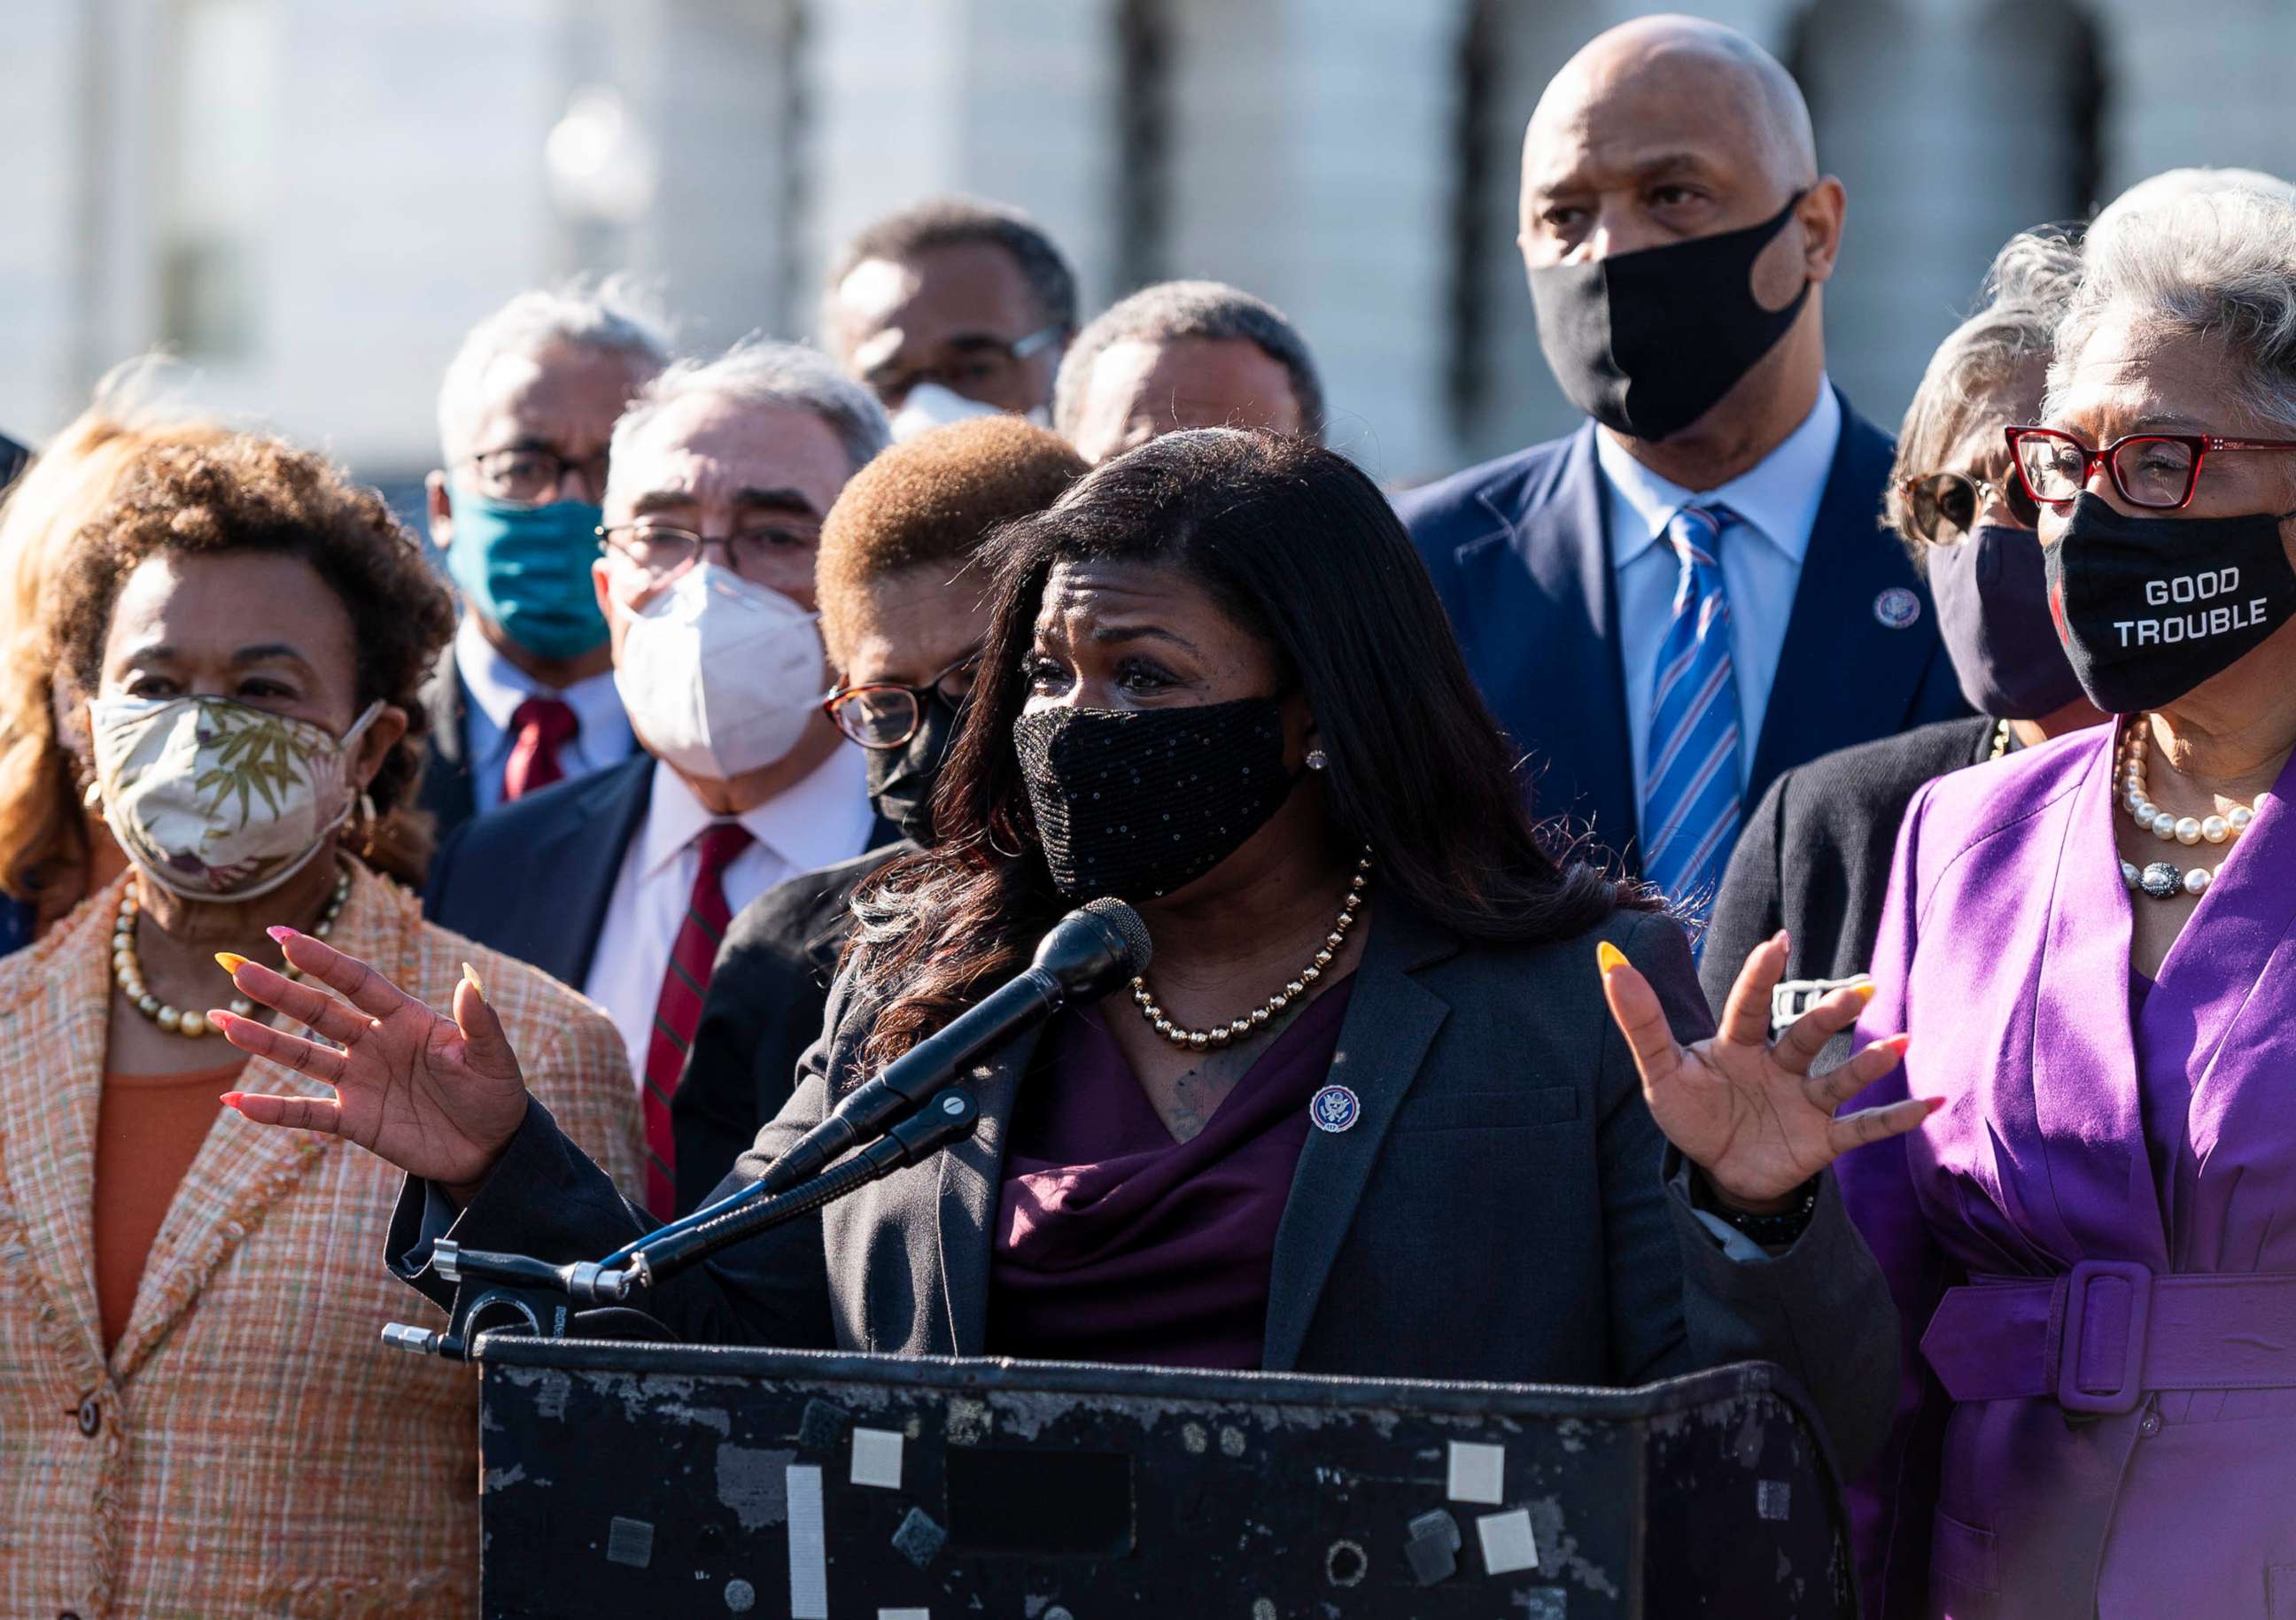 PHOTO: In this April 20, 2021 file photo Cori Bush center, speaks at a news conference surrounded by members of the Congressional Black Caucus after the reading of guilty verdicts in the Derek Chauvin trial.